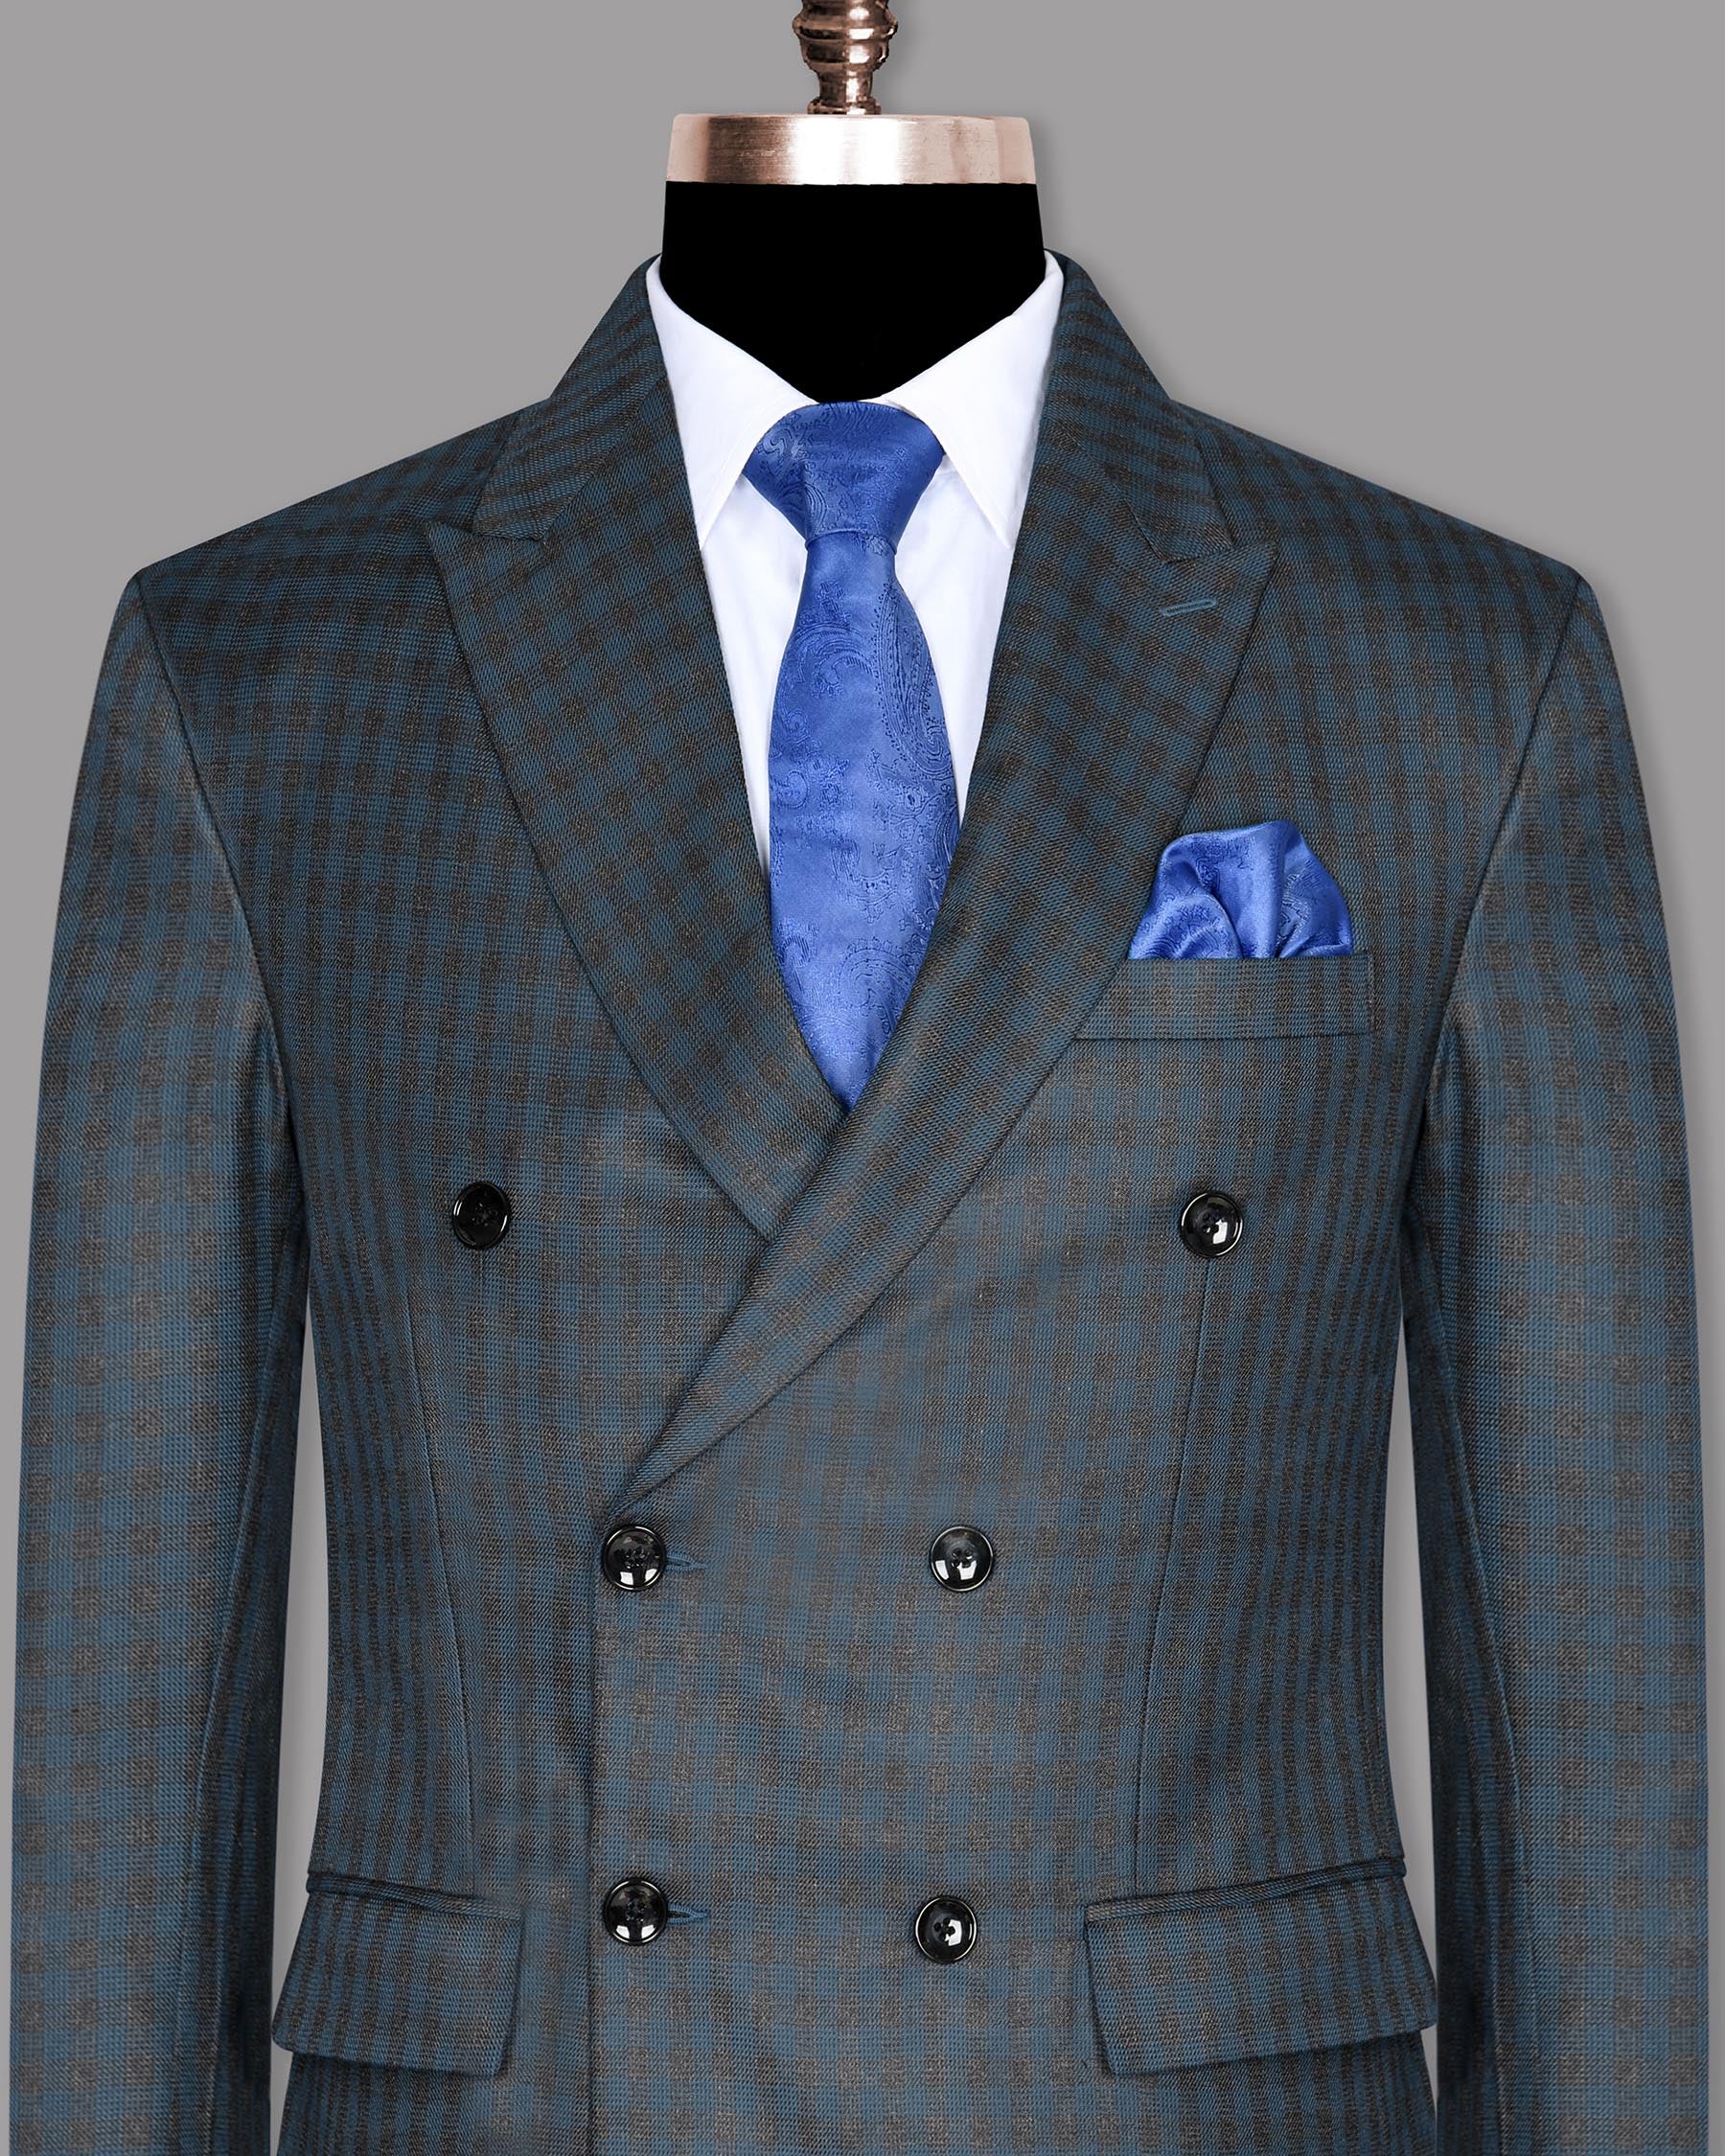 Charcoal with Sapphire Blue Checked Wool Blend Double Breasted Blazer BL708DB-36, BL708DB-40, BL708DB-42, BL708DB-48, BL708DB-46, BL708DB-50, BL708DB-56, BL708DB-60, BL708DB-58, BL708DB-38, BL708DB-44, BL708DB-52, BL708DB-54